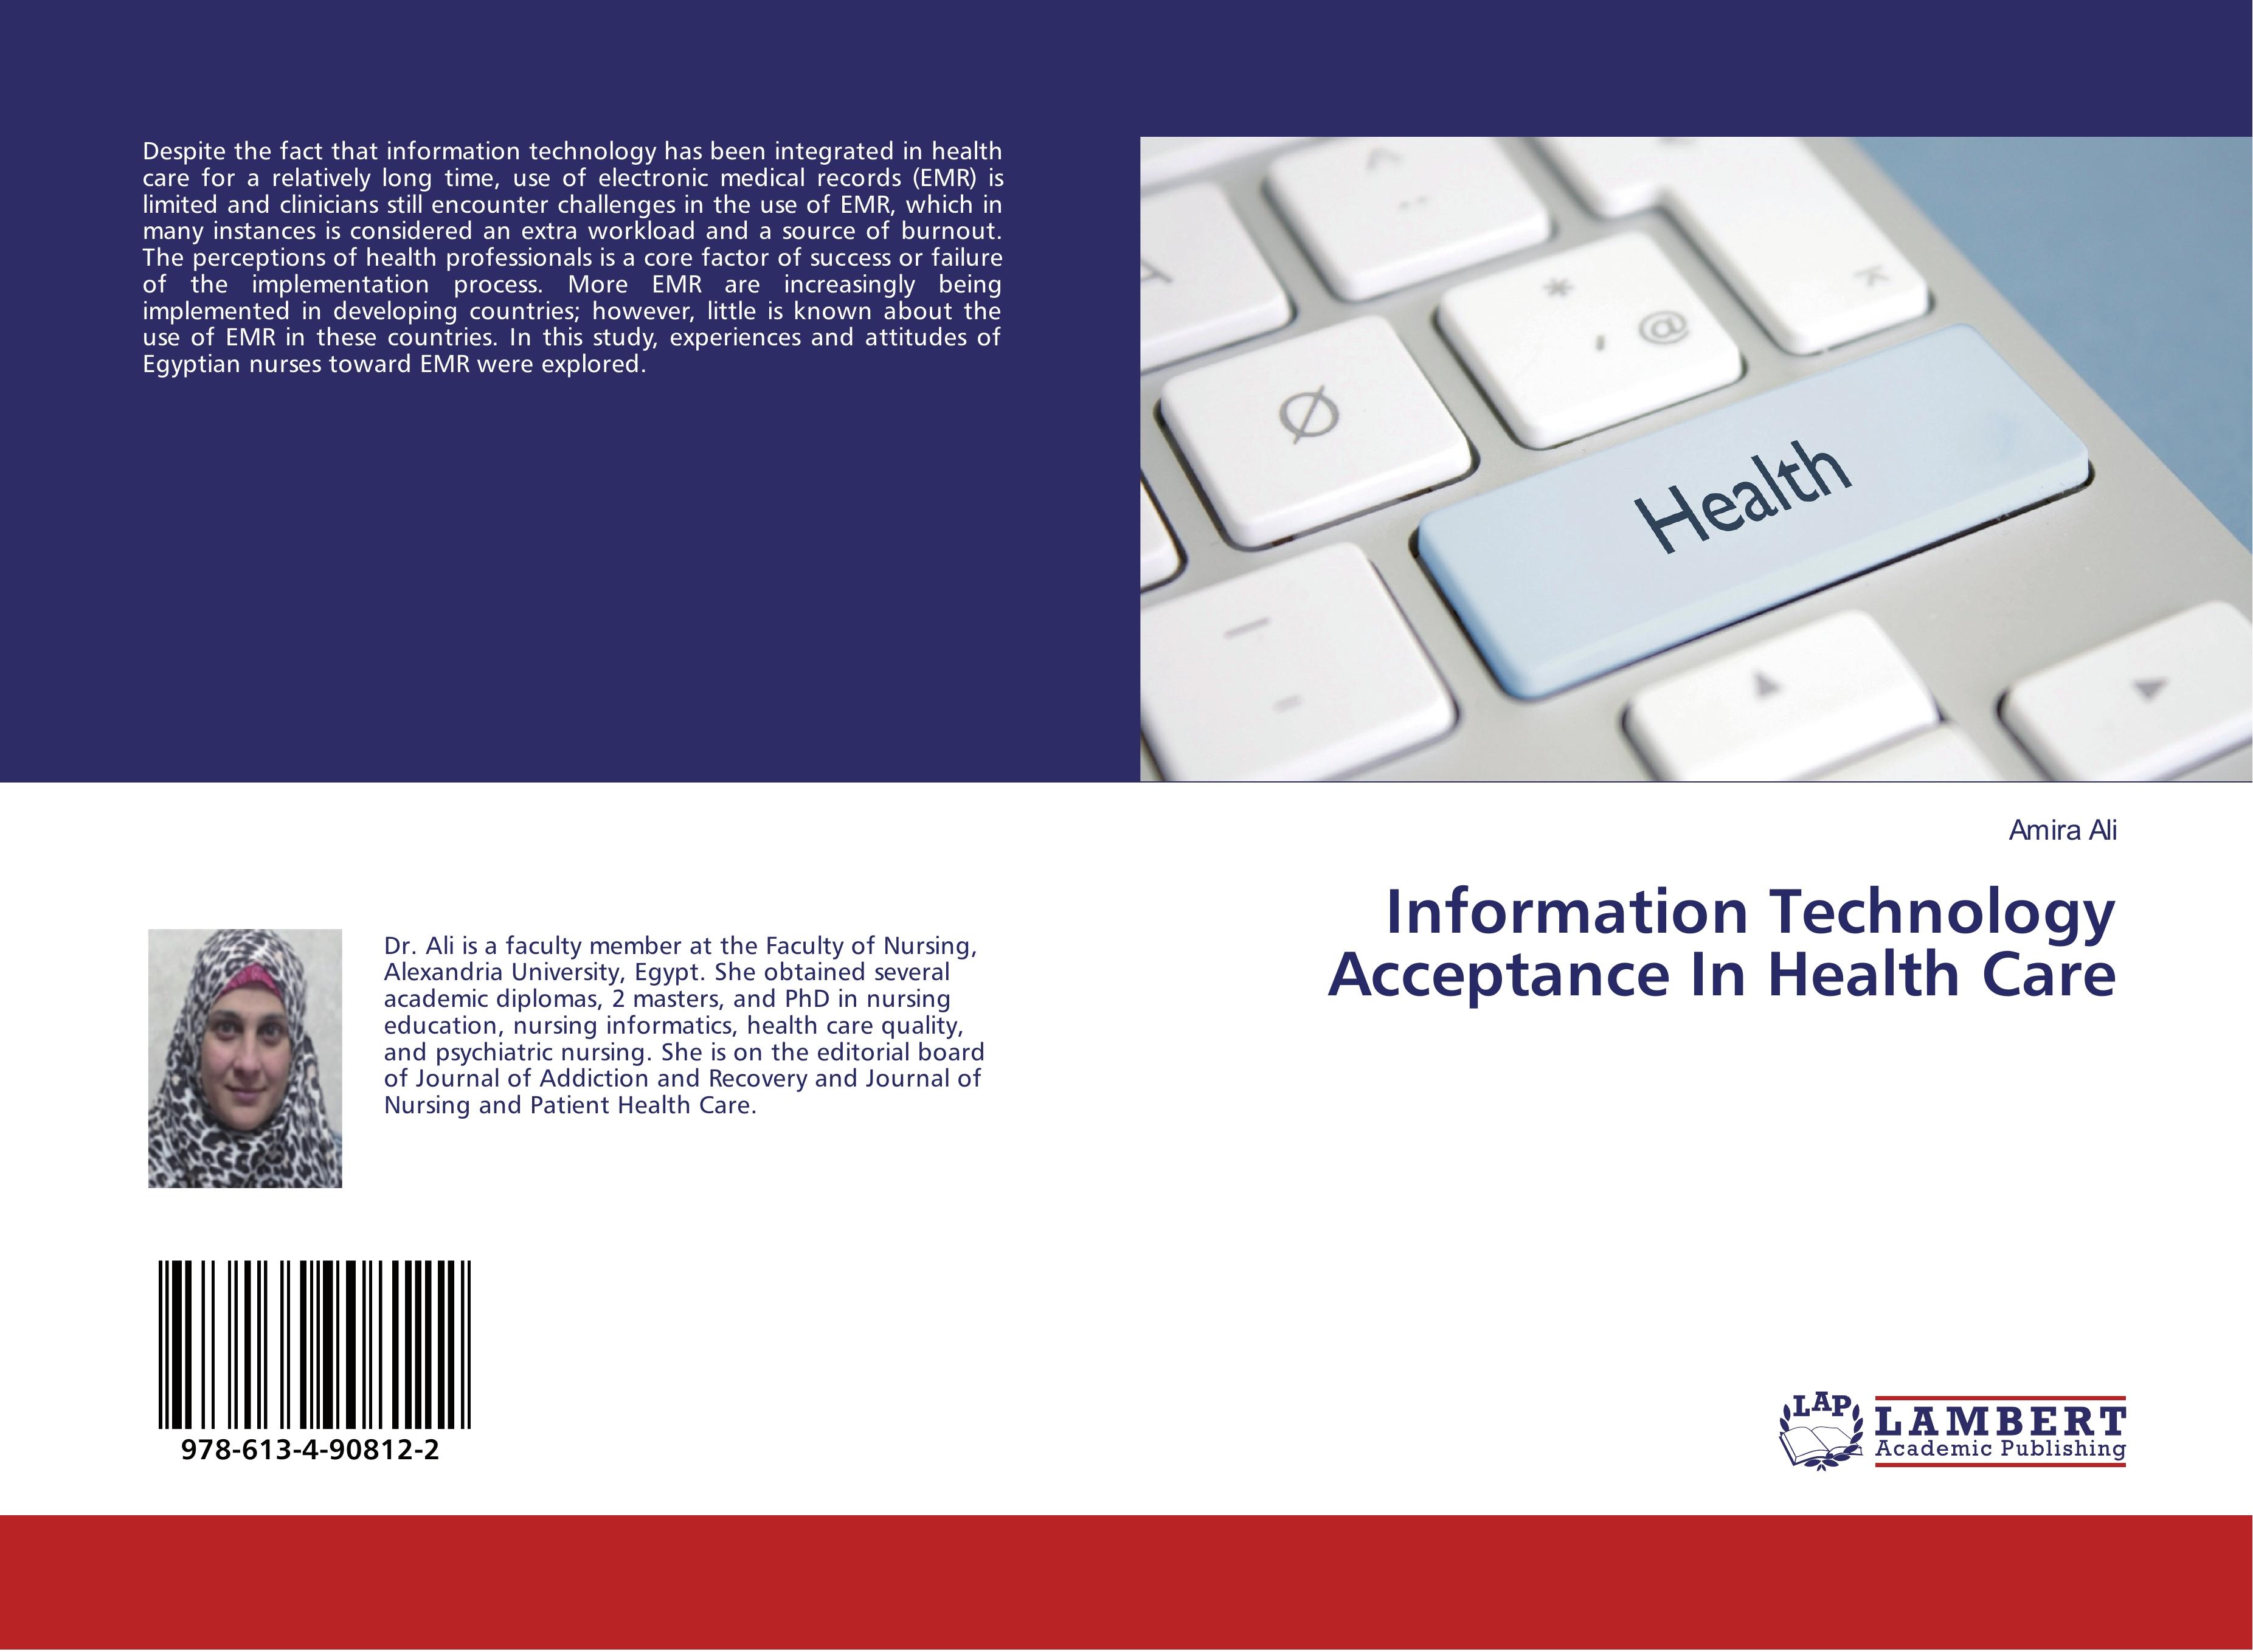 Information Technology Acceptance In Health Care - Amira Ali